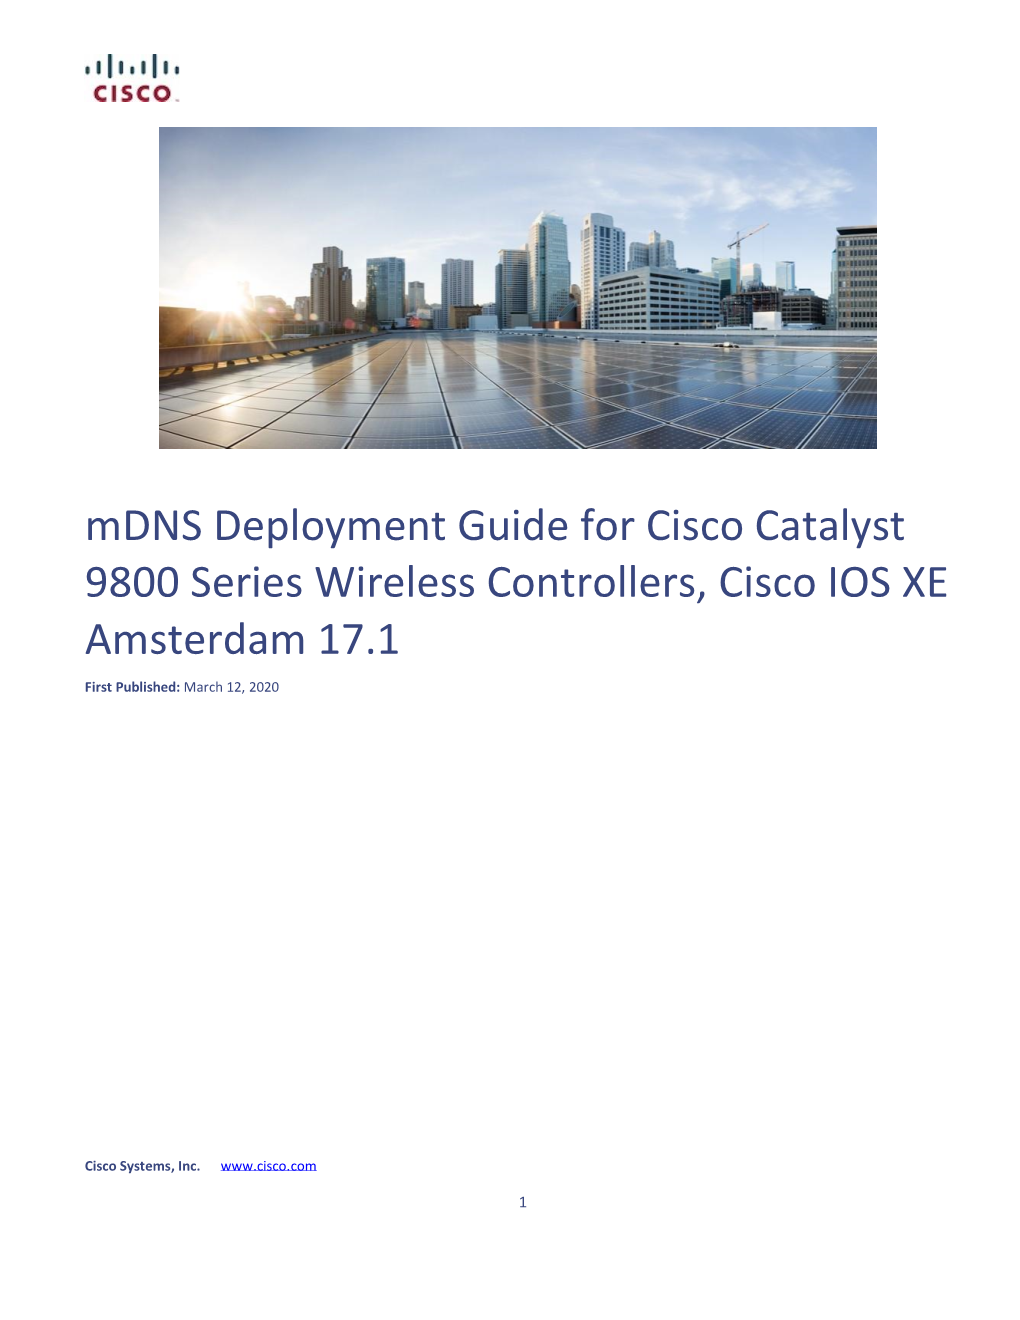 Mdns Deployment Guide for Cisco Catalyst 9800 Series Wireless Controllers, Cisco IOS XE Amsterdam 17.1 First Published: March 12, 2020